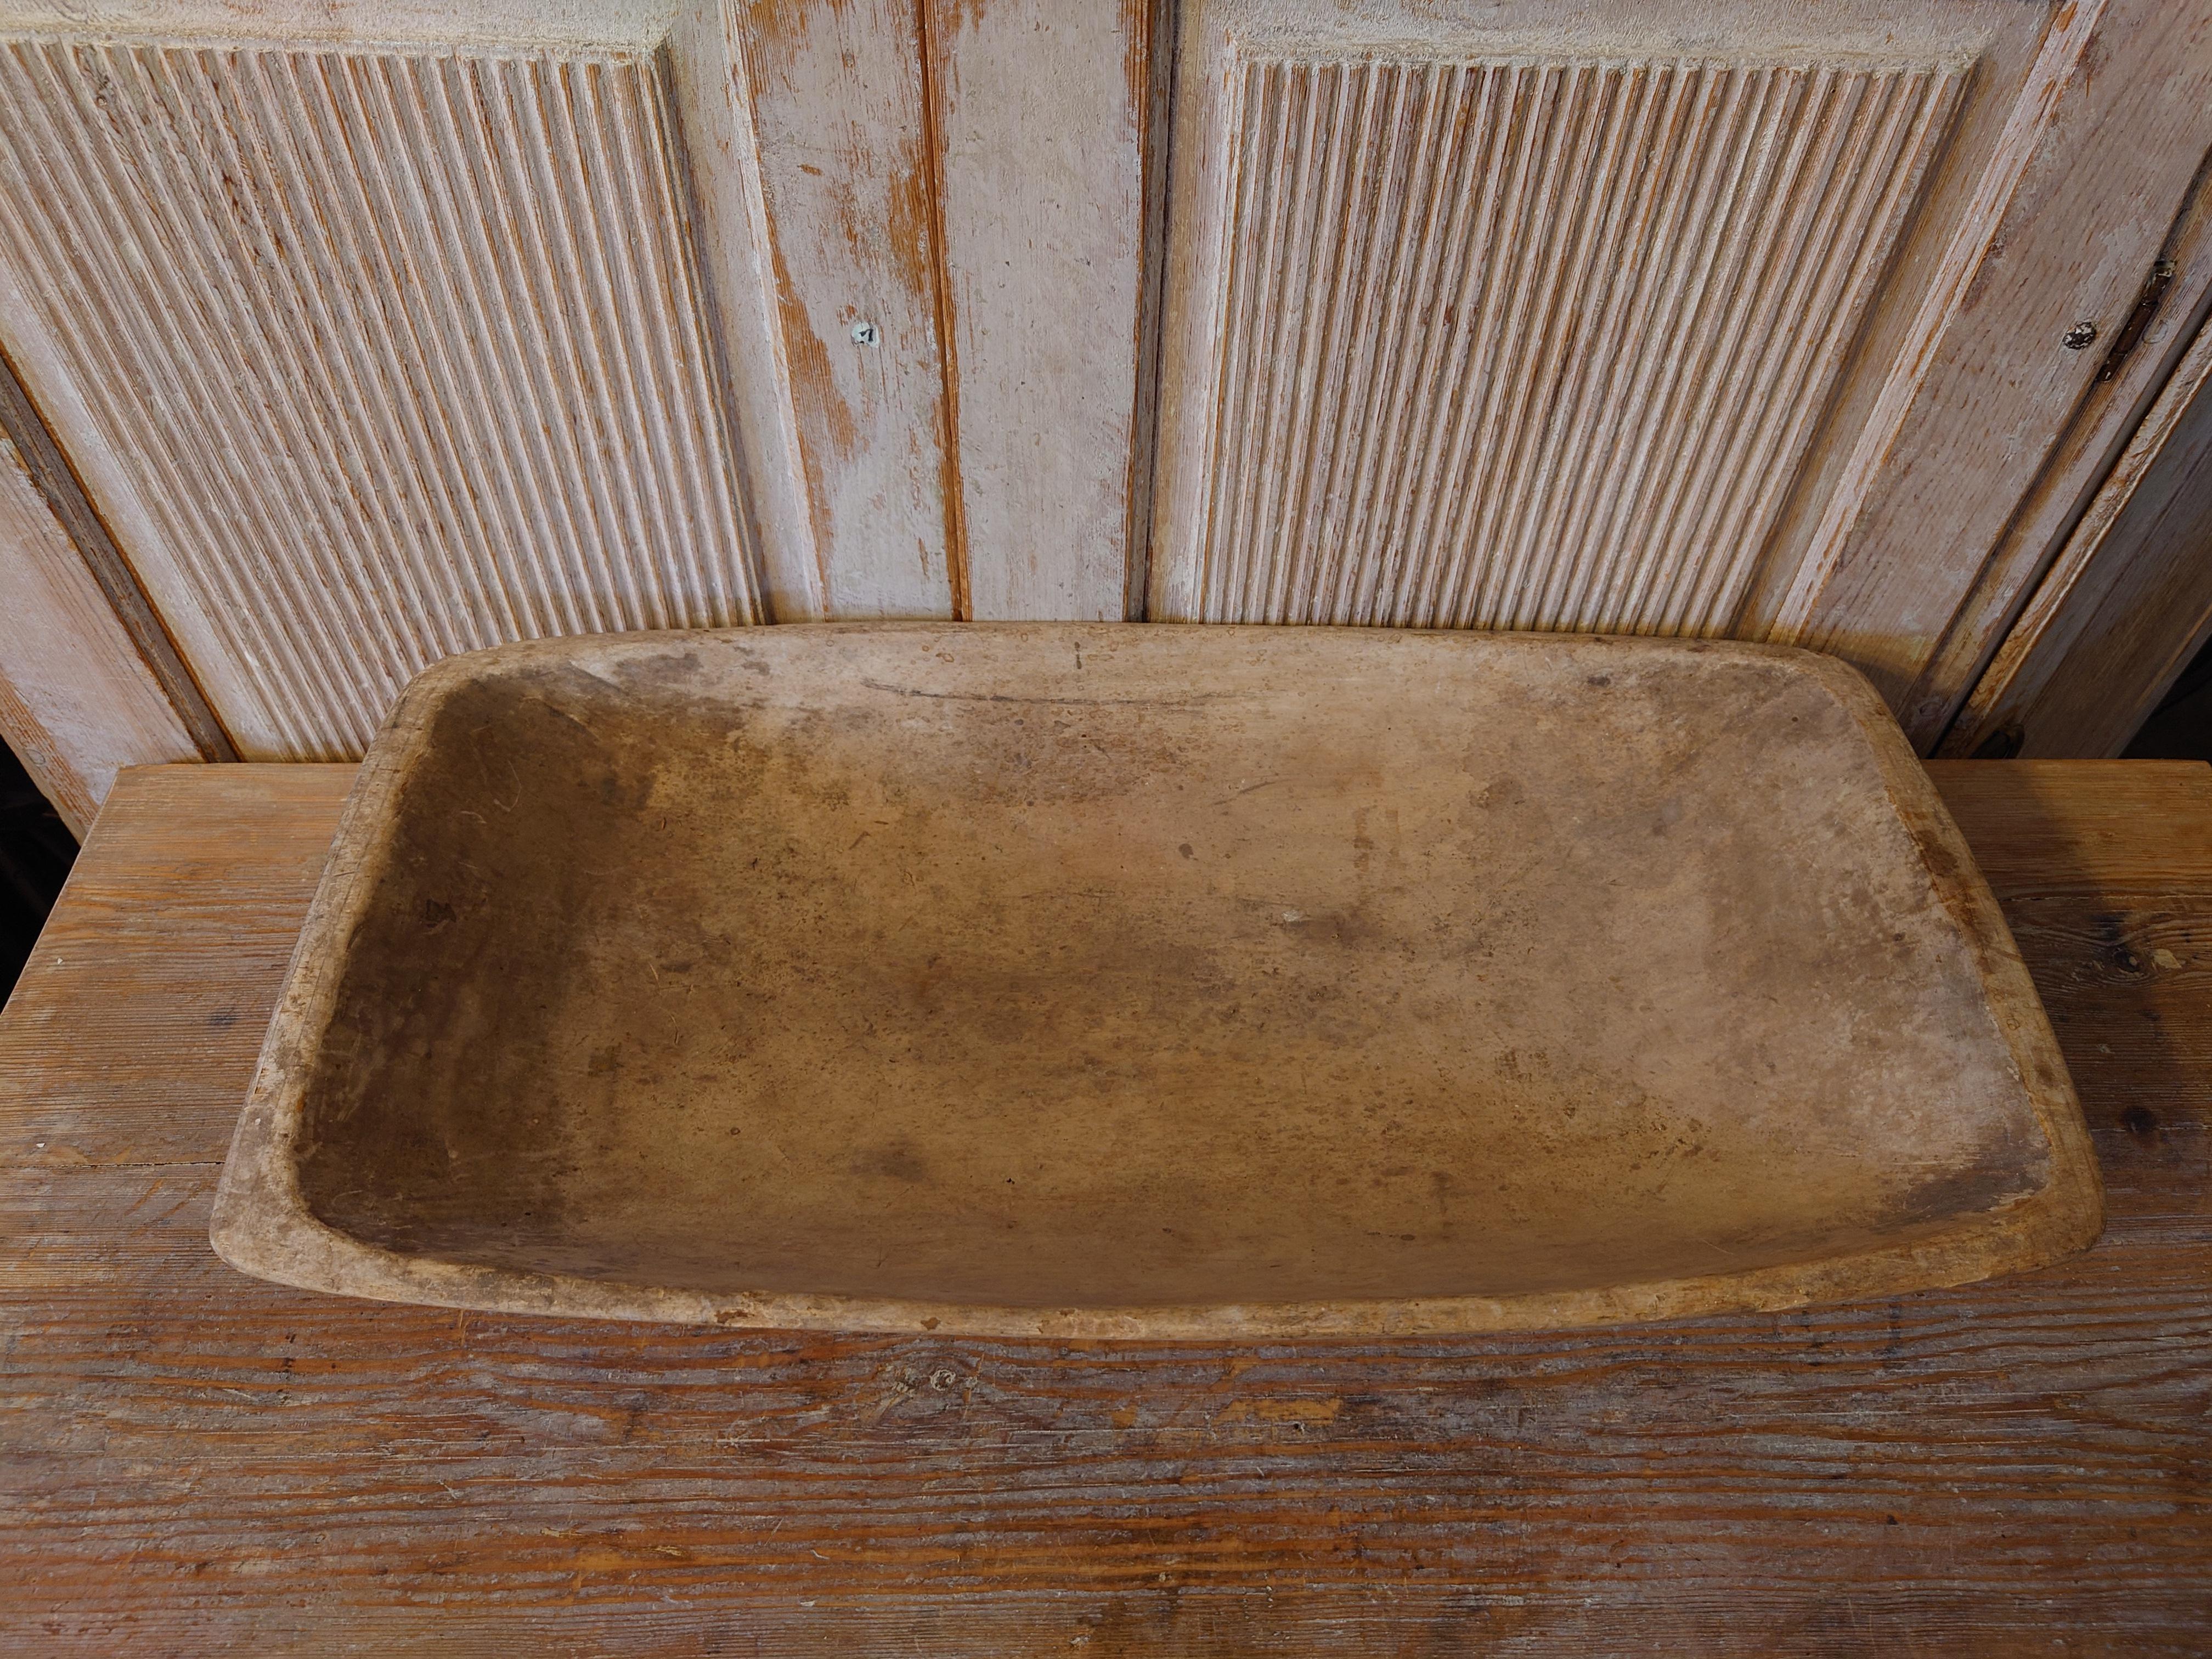 19th Century Swedish  Antique Rustic Folk Art Wooden Trough/ Serving Bowl In Good Condition For Sale In Boden, SE